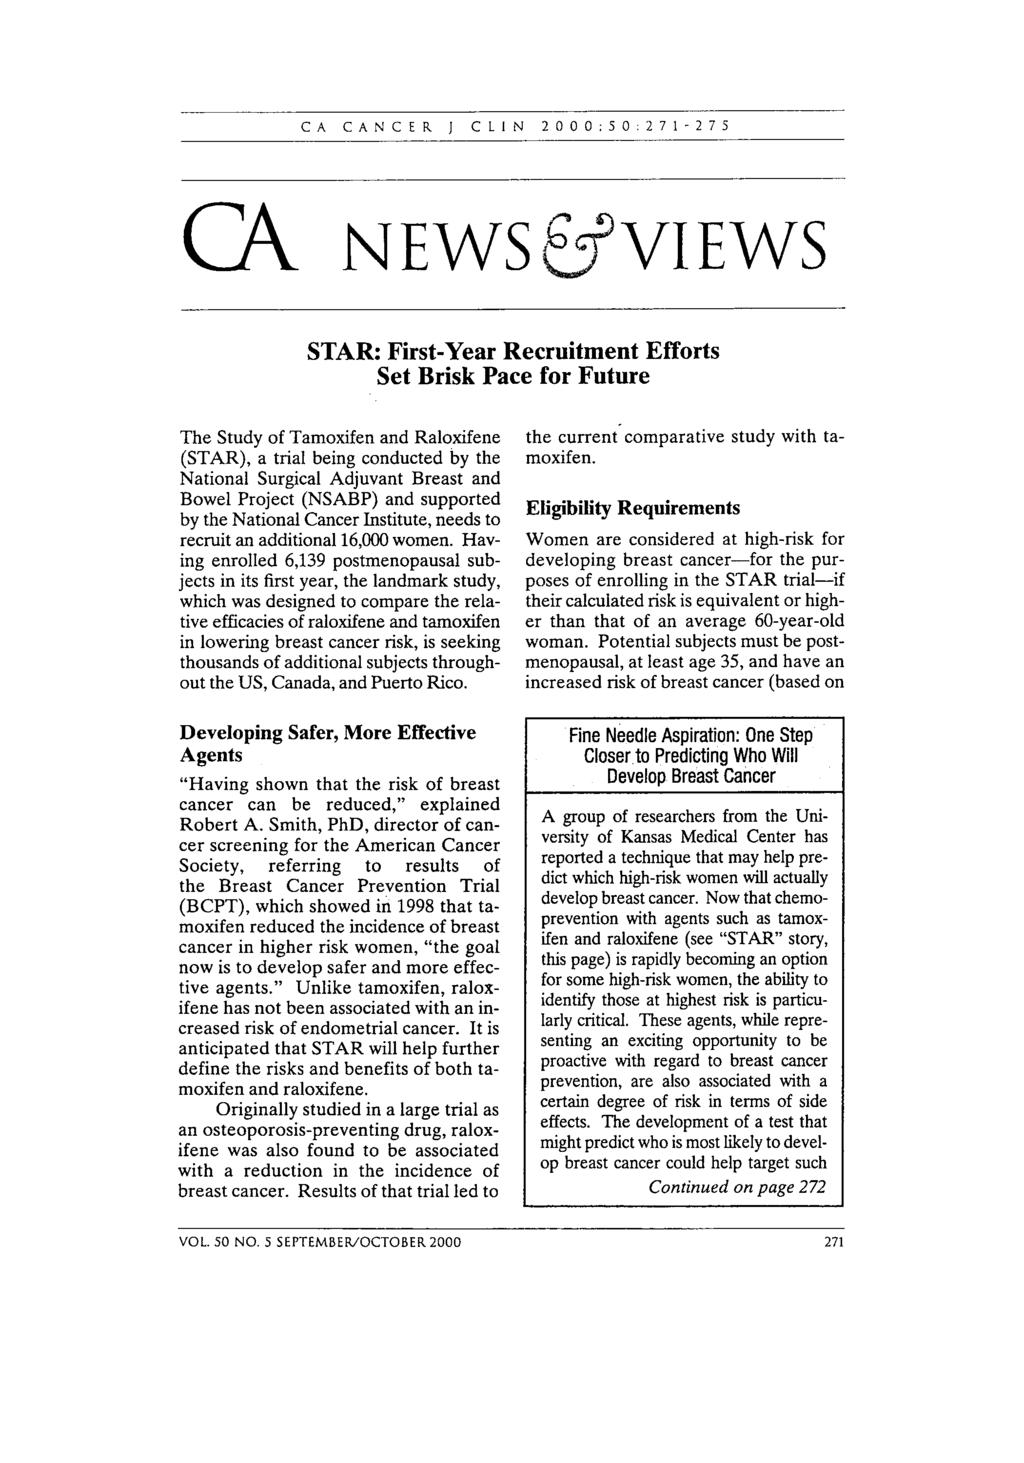 CA NEWS&VIEWS STAR: First-Year Recruitment Efforts Set Brisk Pace for Future The Study of Tamoxifen and Raloxifene (STAR), a trial being conducted by the National Surgical Adjuvant Breast and Bowel